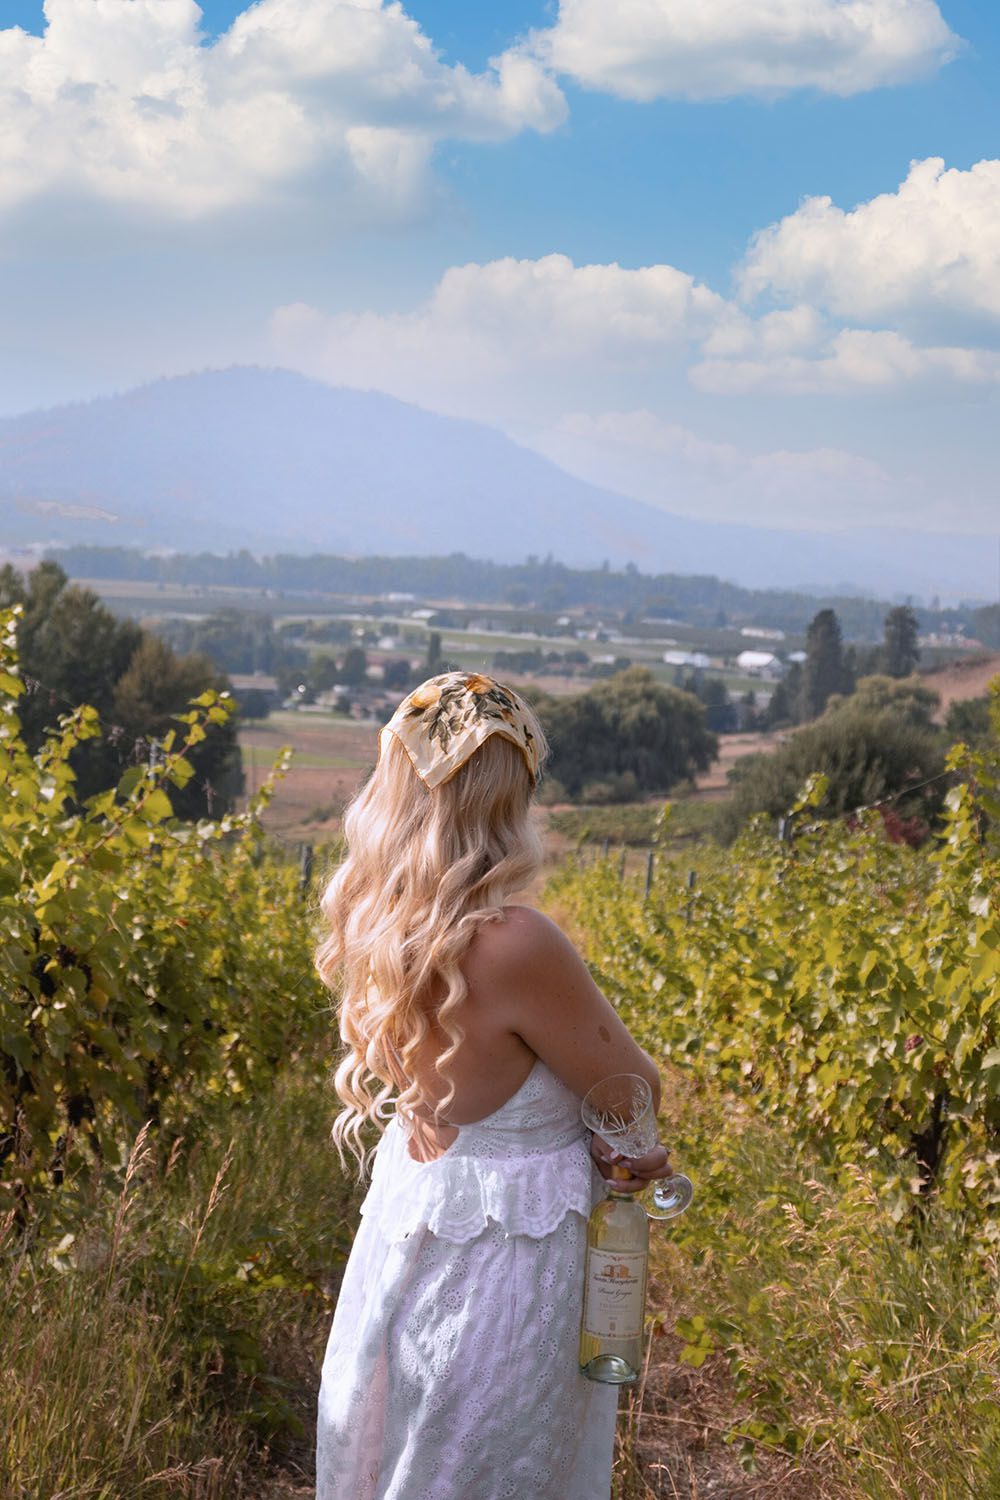 If you're heading to the Okanagan soon and planning on spending time in Kelowna, you don't want to miss this guide to the best wineries in Kelowna! From organic wineries to wineries with the best view, this guide will help you plan your visit to Kelowna’s incredible wine region. Pictured here: Ancient Hill Winery